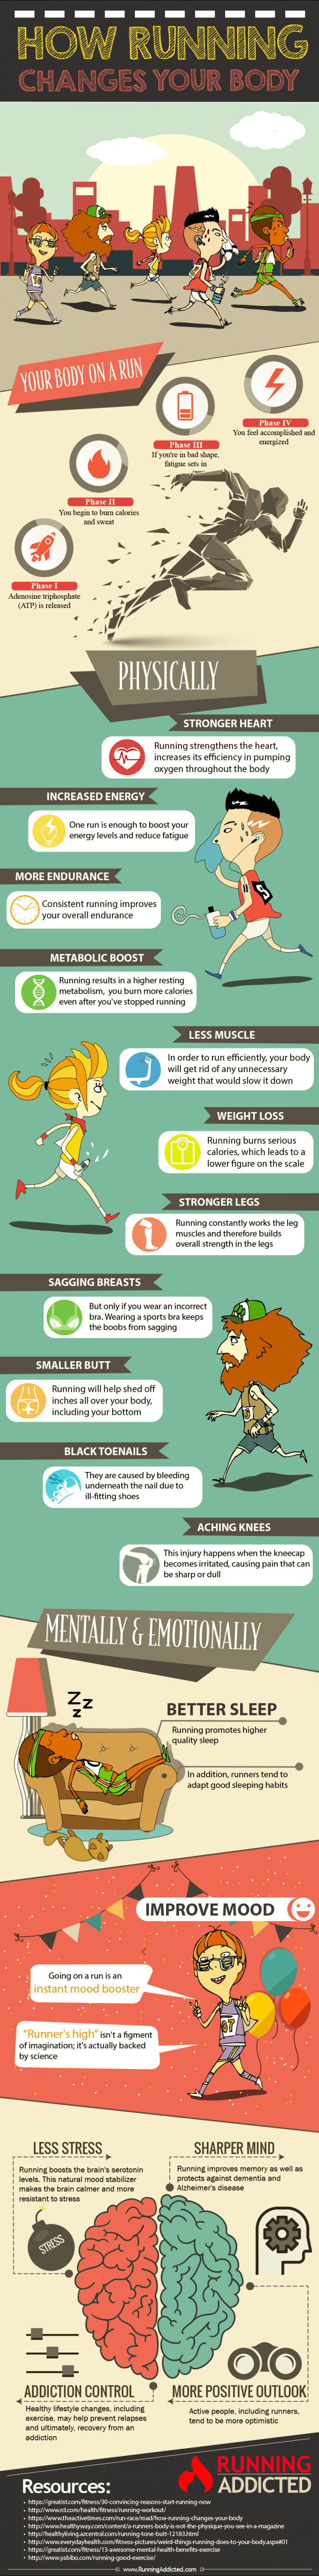 How Running Effects Your Body